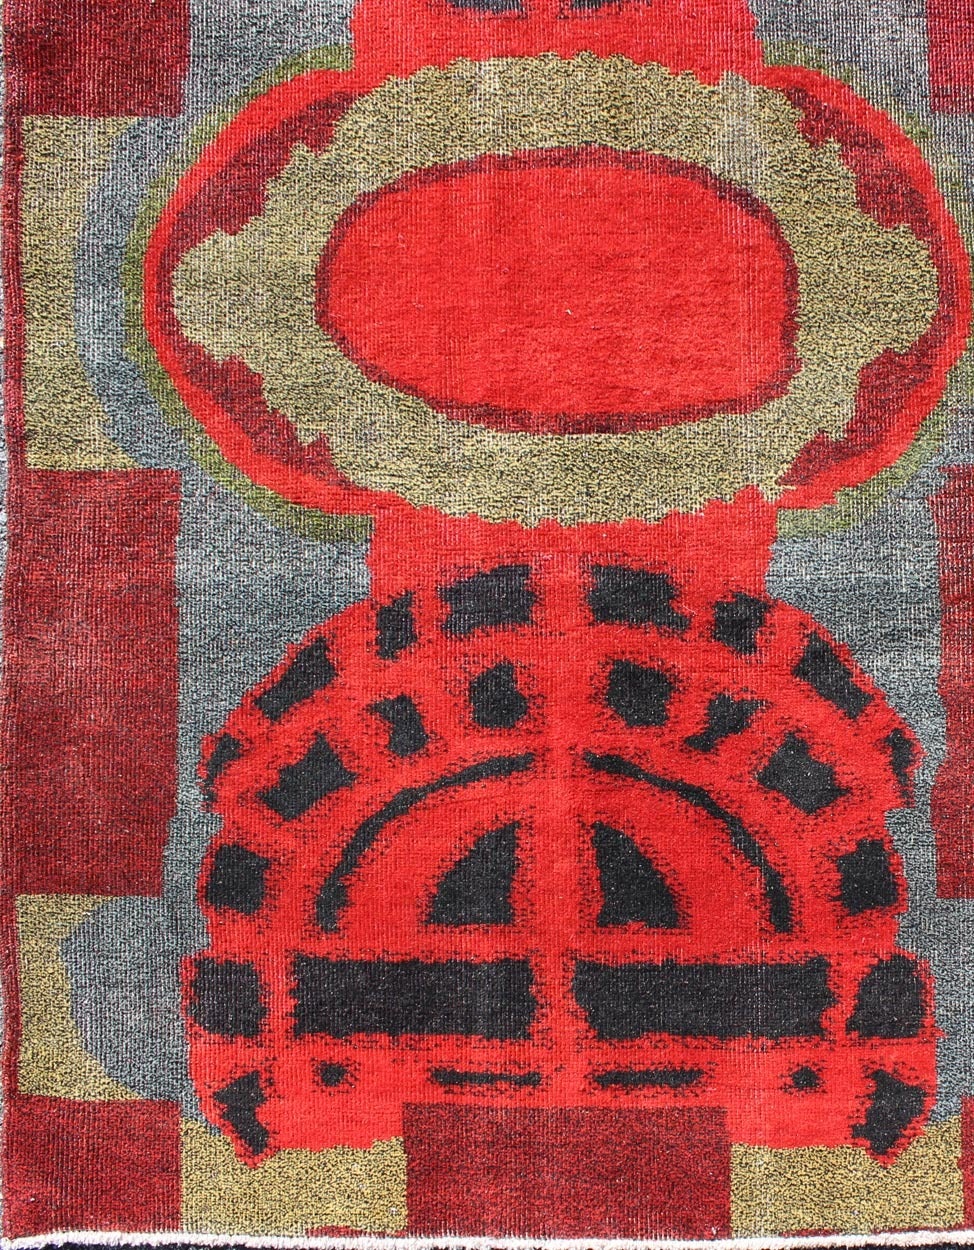 Mid-Century Modern  Art Nouveau Design Rug from the Mid 20th Century in Red, Green, Blue & Black    For Sale